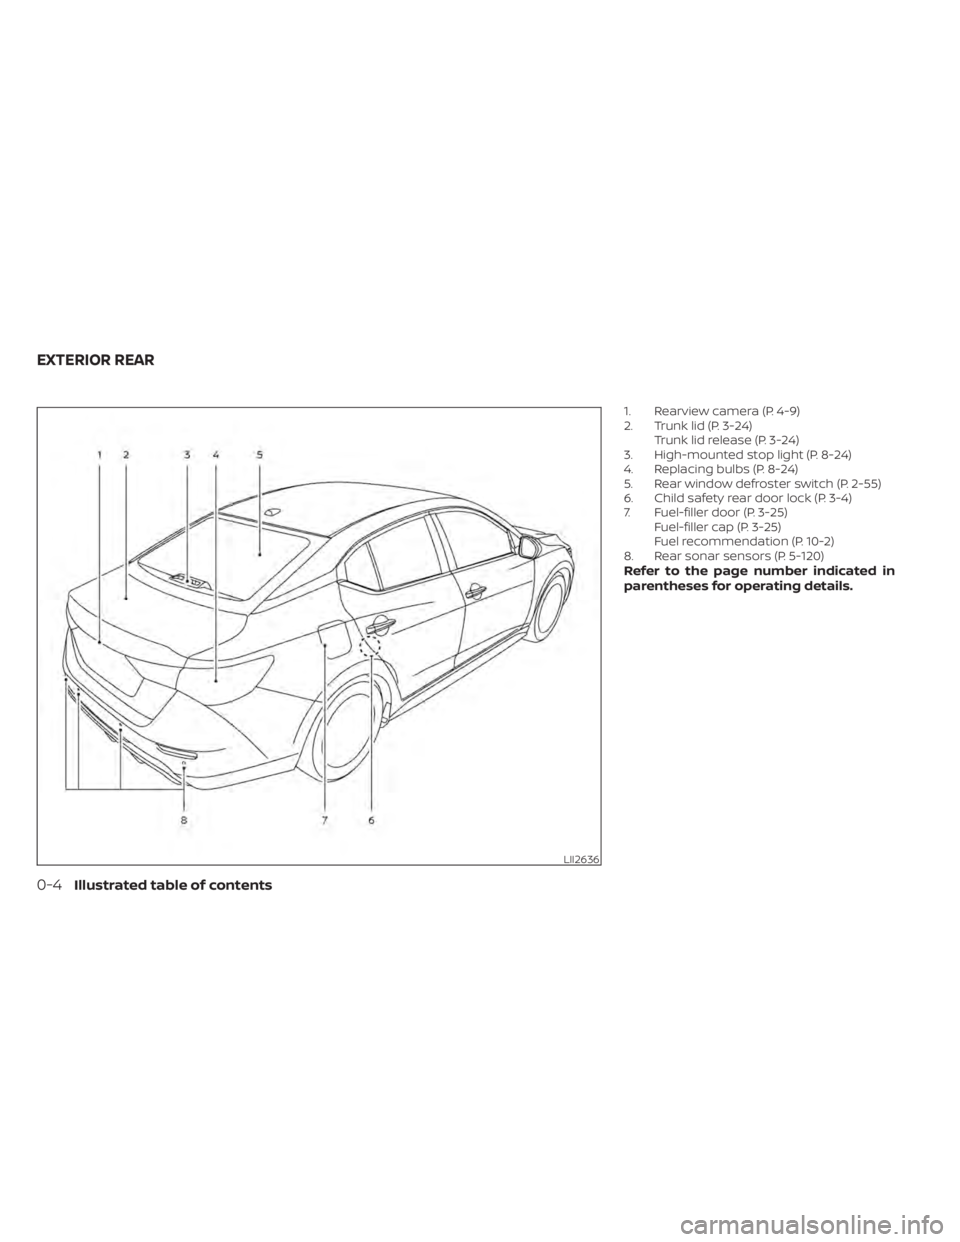 NISSAN SENTRA 2021  Owners Manual 1. Rearview camera (P. 4-9)
2. Trunk lid (P. 3-24)Trunk lid release (P. 3-24)
3. High-mounted stop light (P. 8-24)
4. Replacing bulbs (P. 8-24)
5. Rear window defroster switch (P. 2-55)
6. Child safet